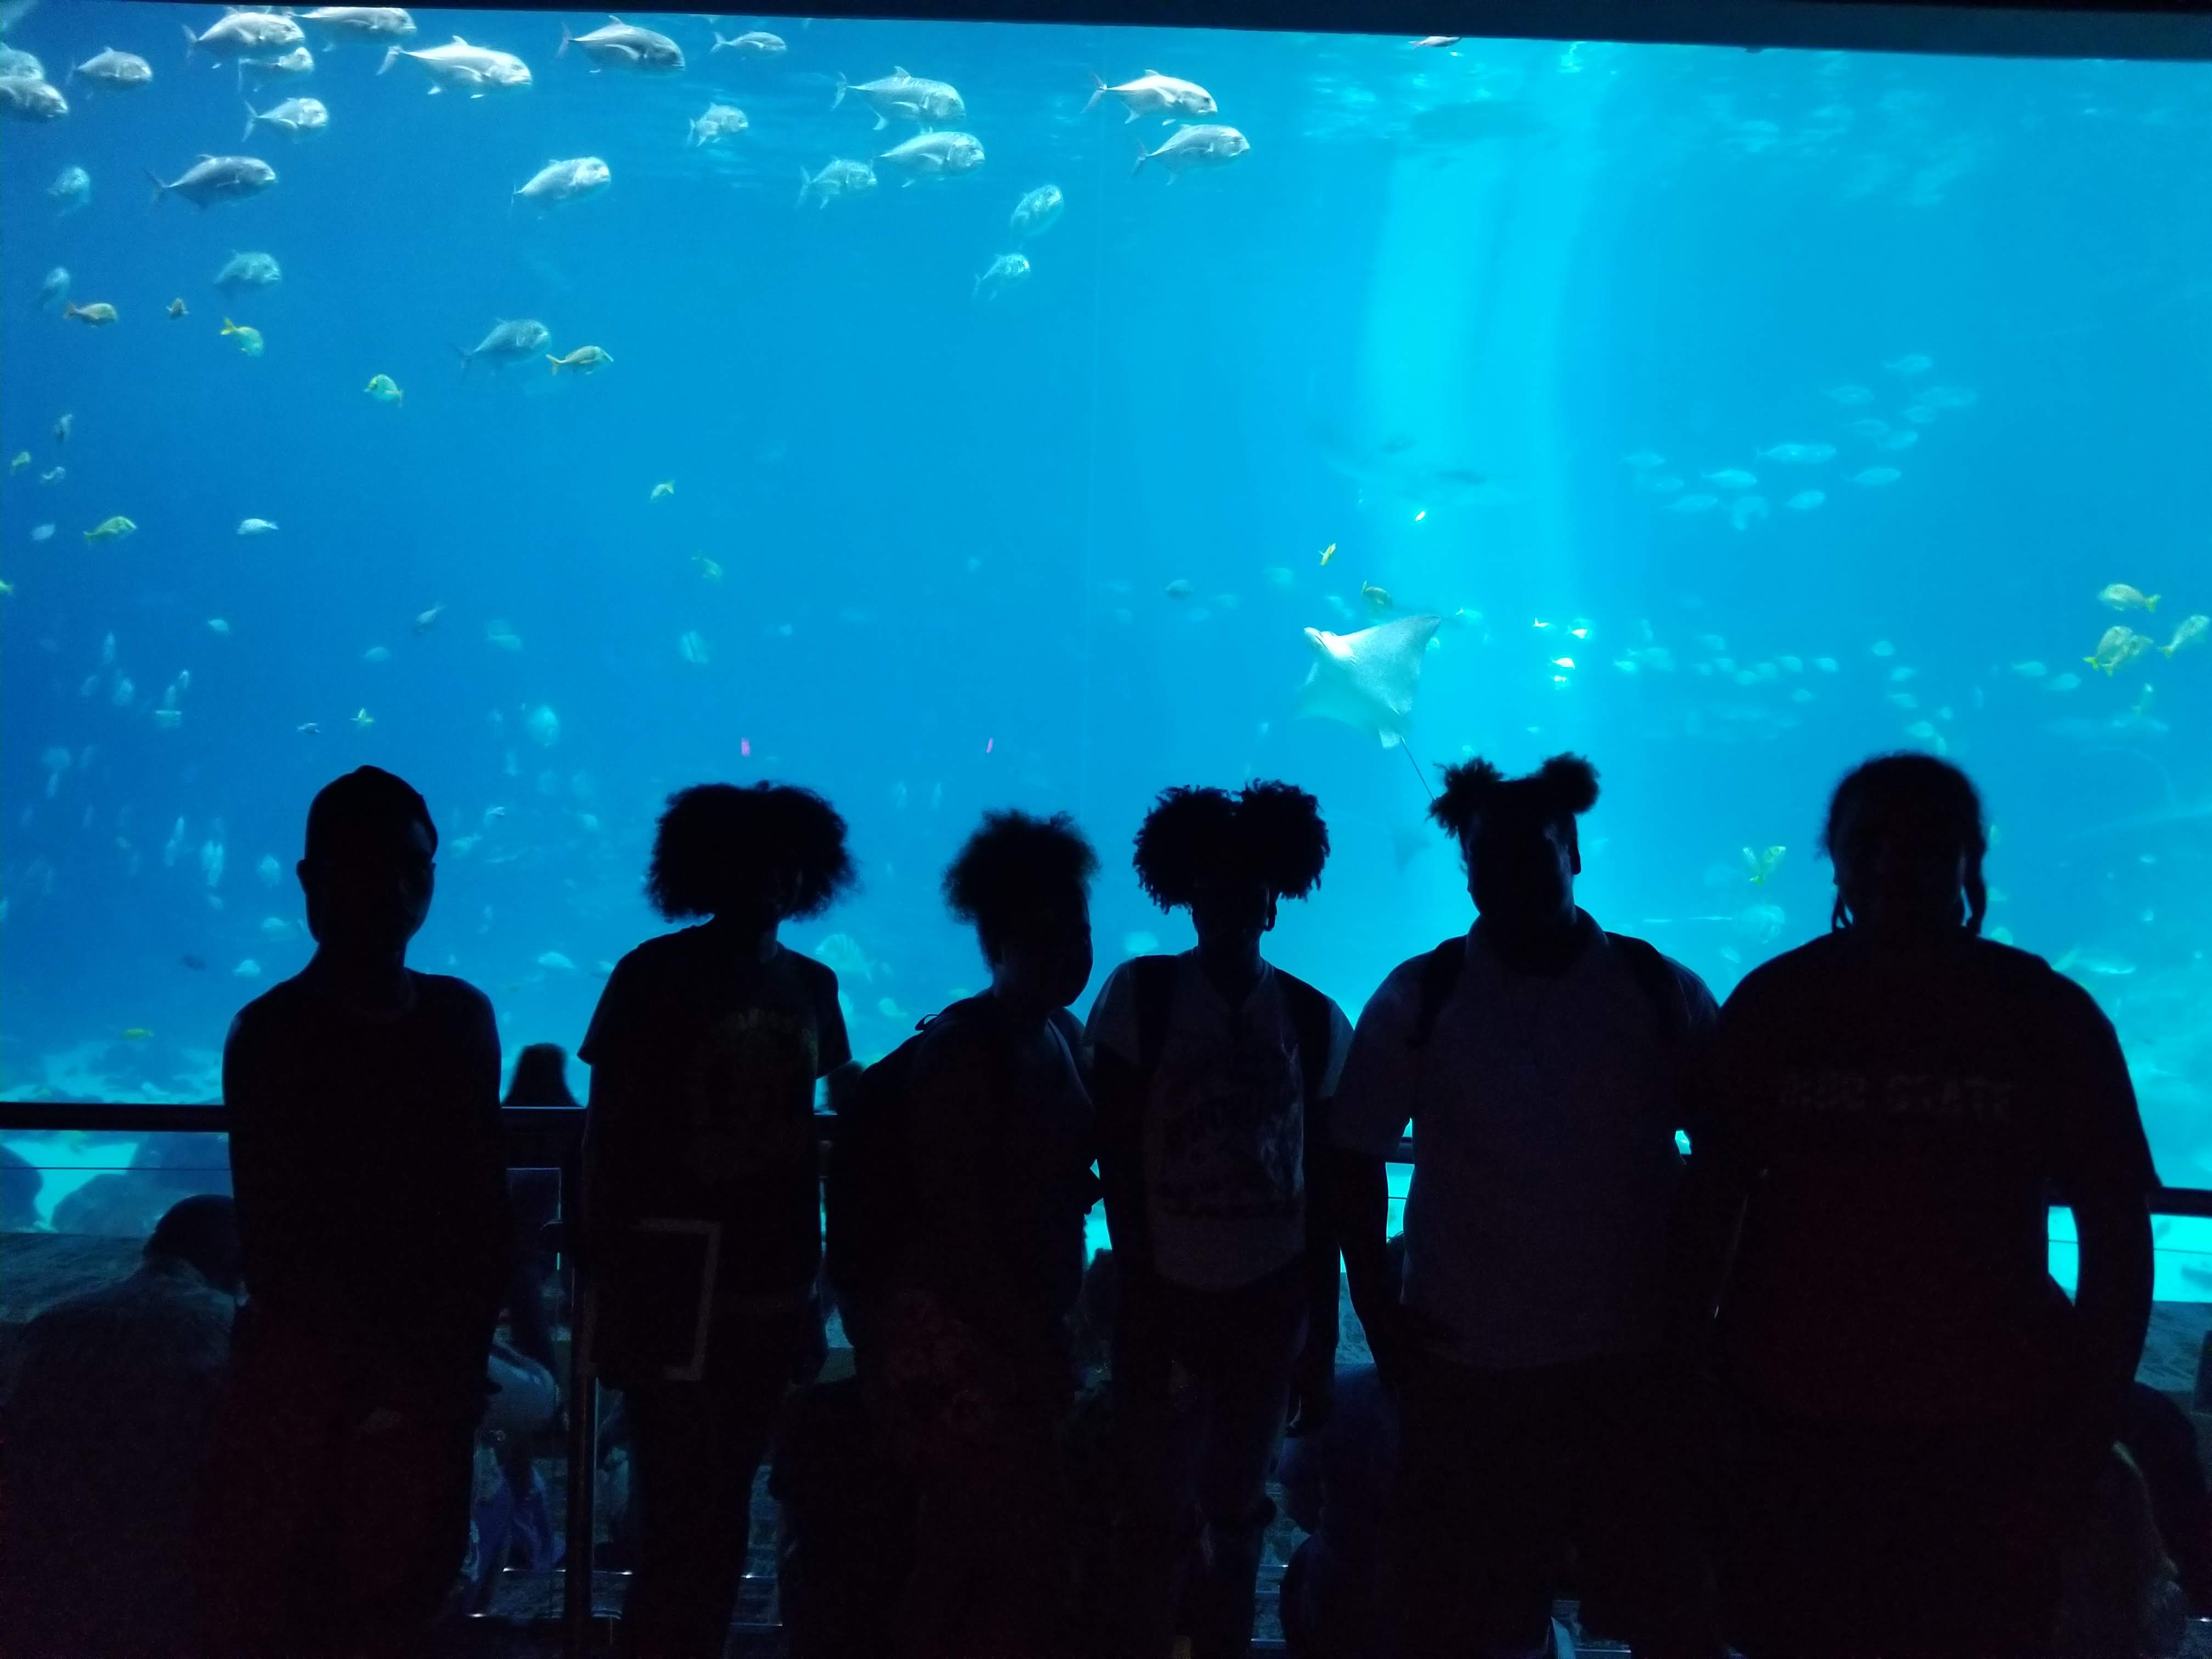 Upward Bound students stand in front of a large aquarium